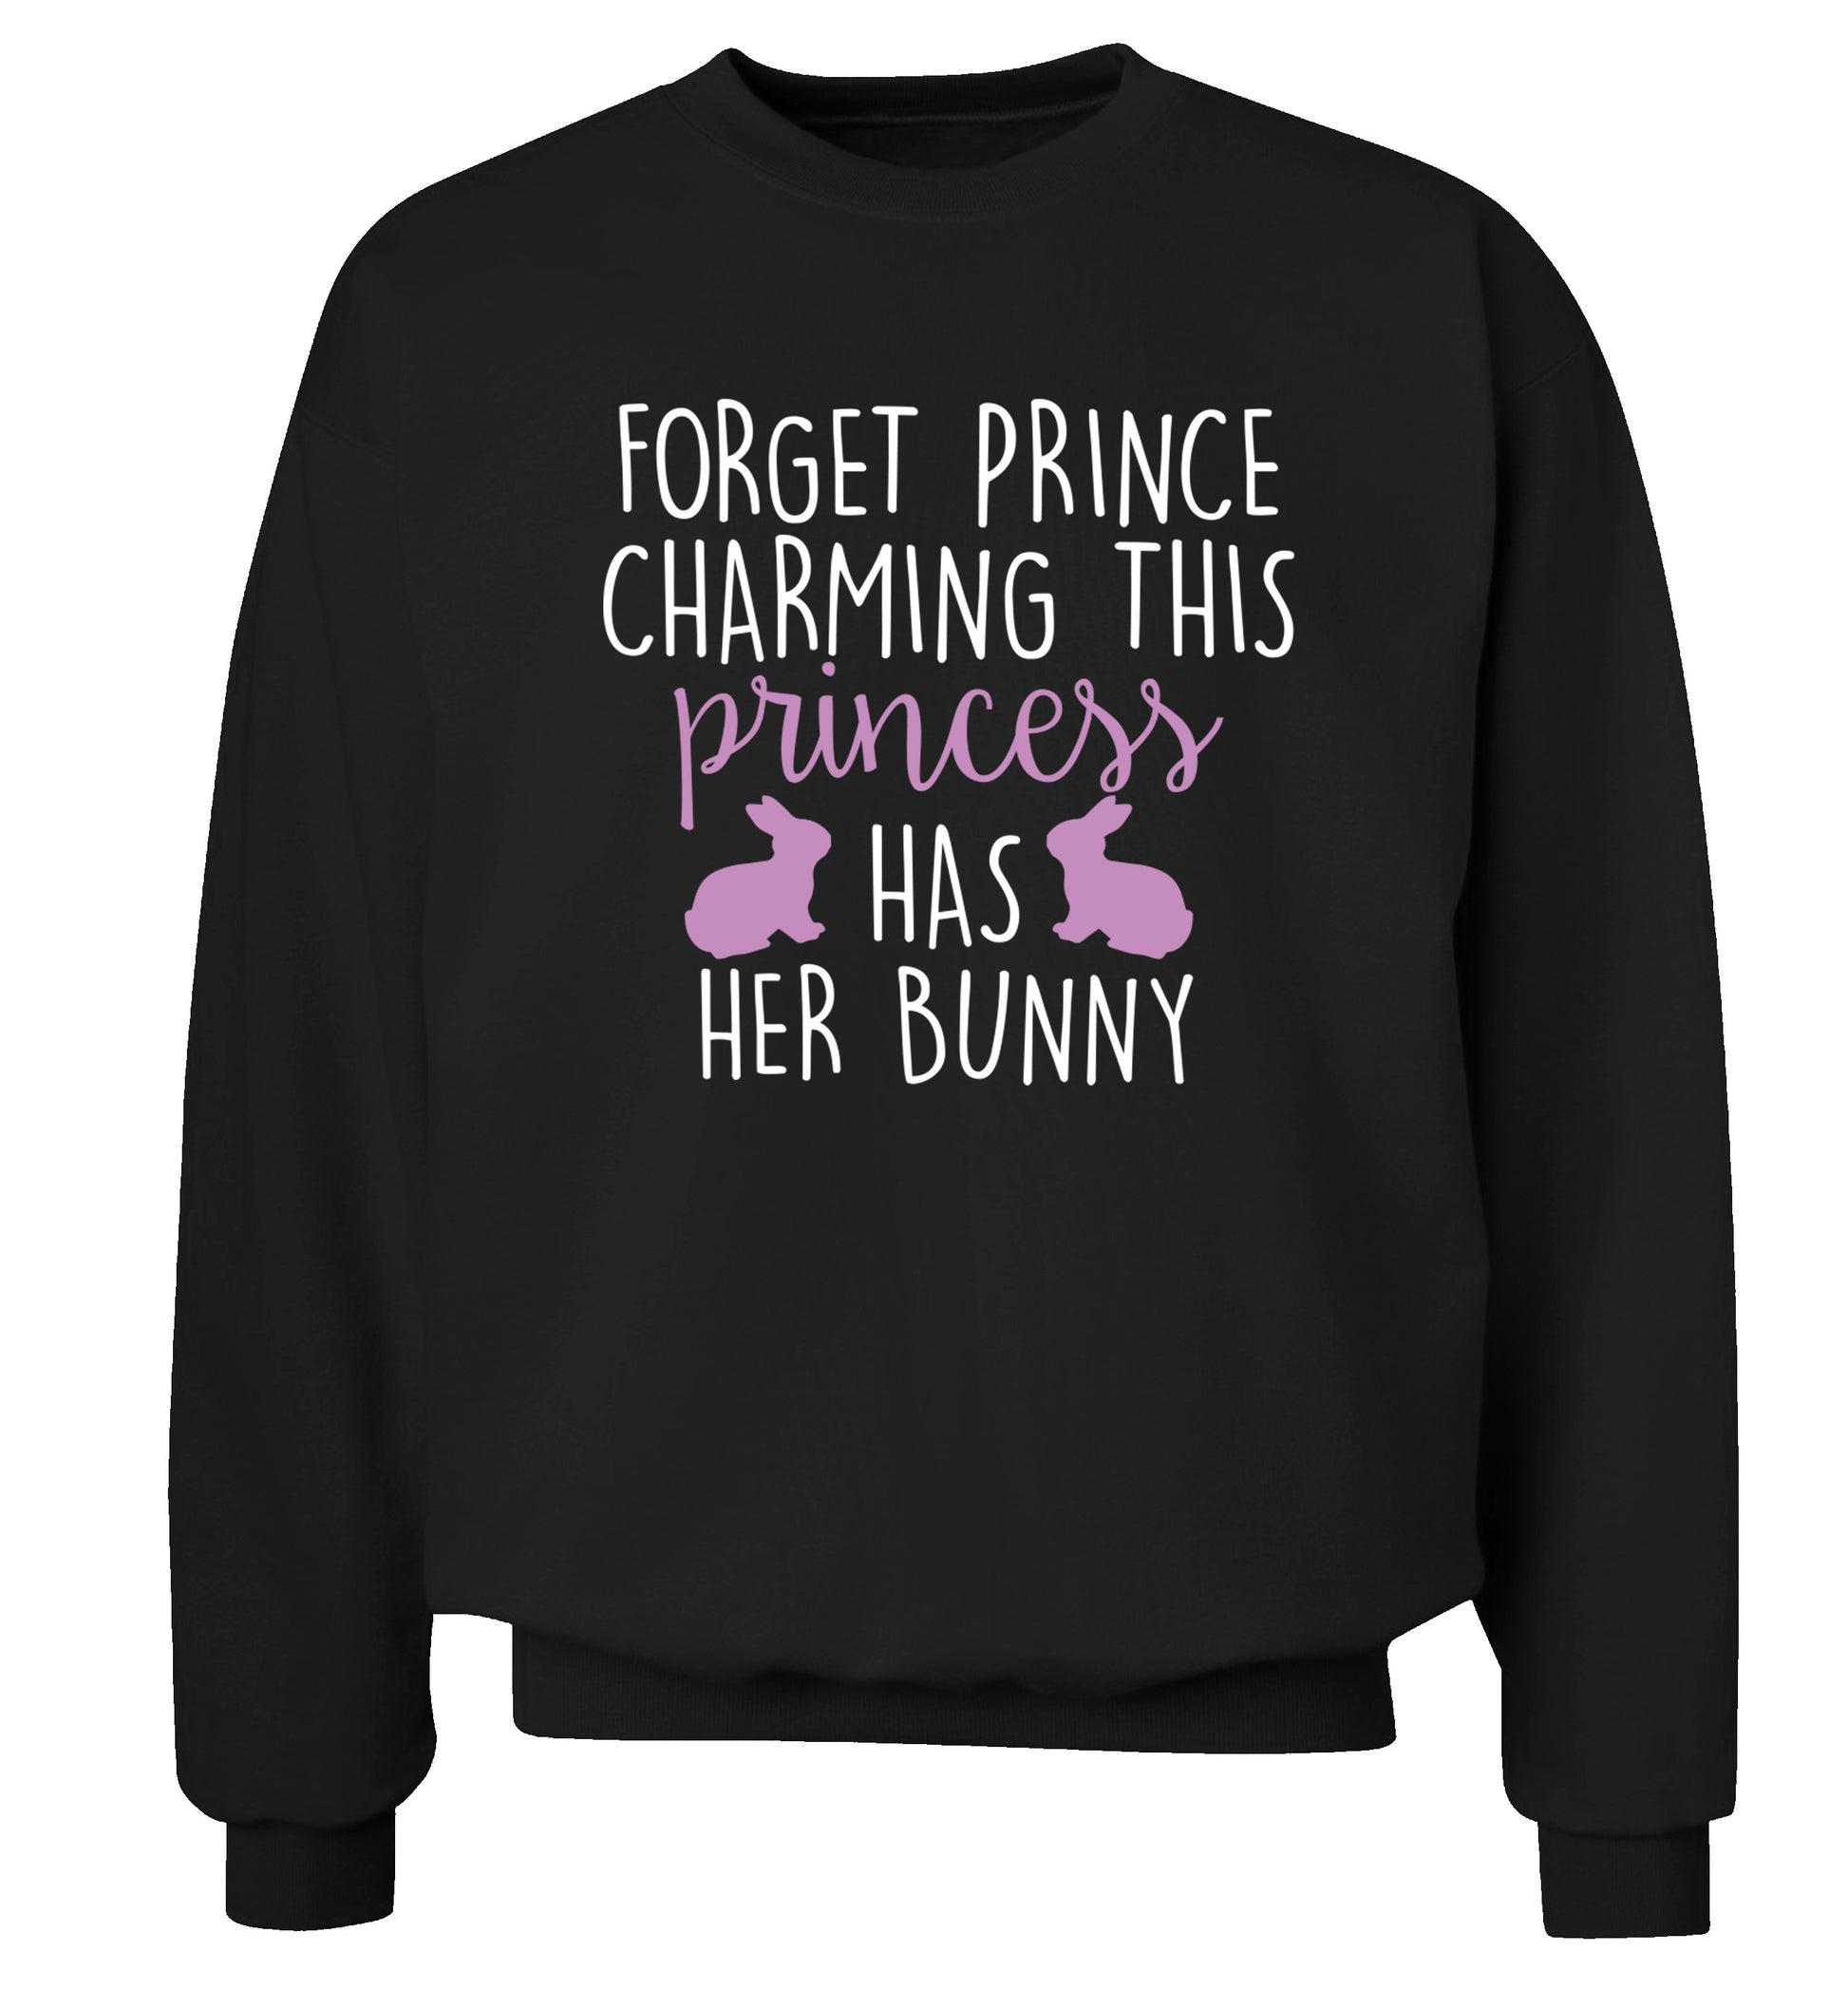 Forget prince charming this princess has her bunny Adult's unisex black  sweater 2XL